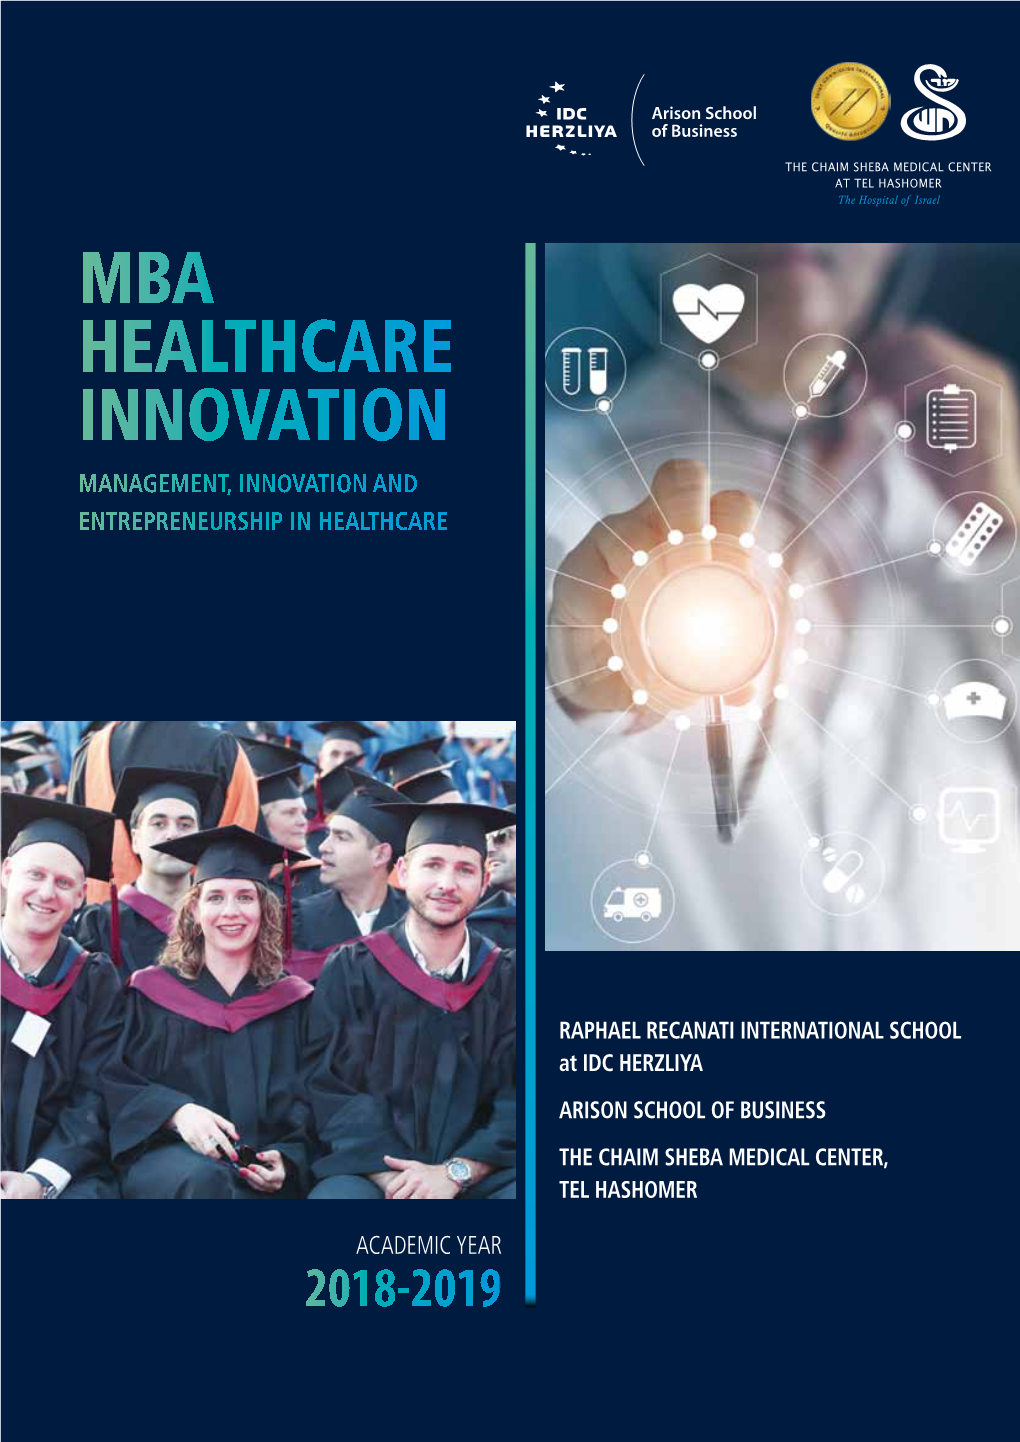 Mba Healthcare Innovation Management, Innovation and Entrepreneurship in Healthcare